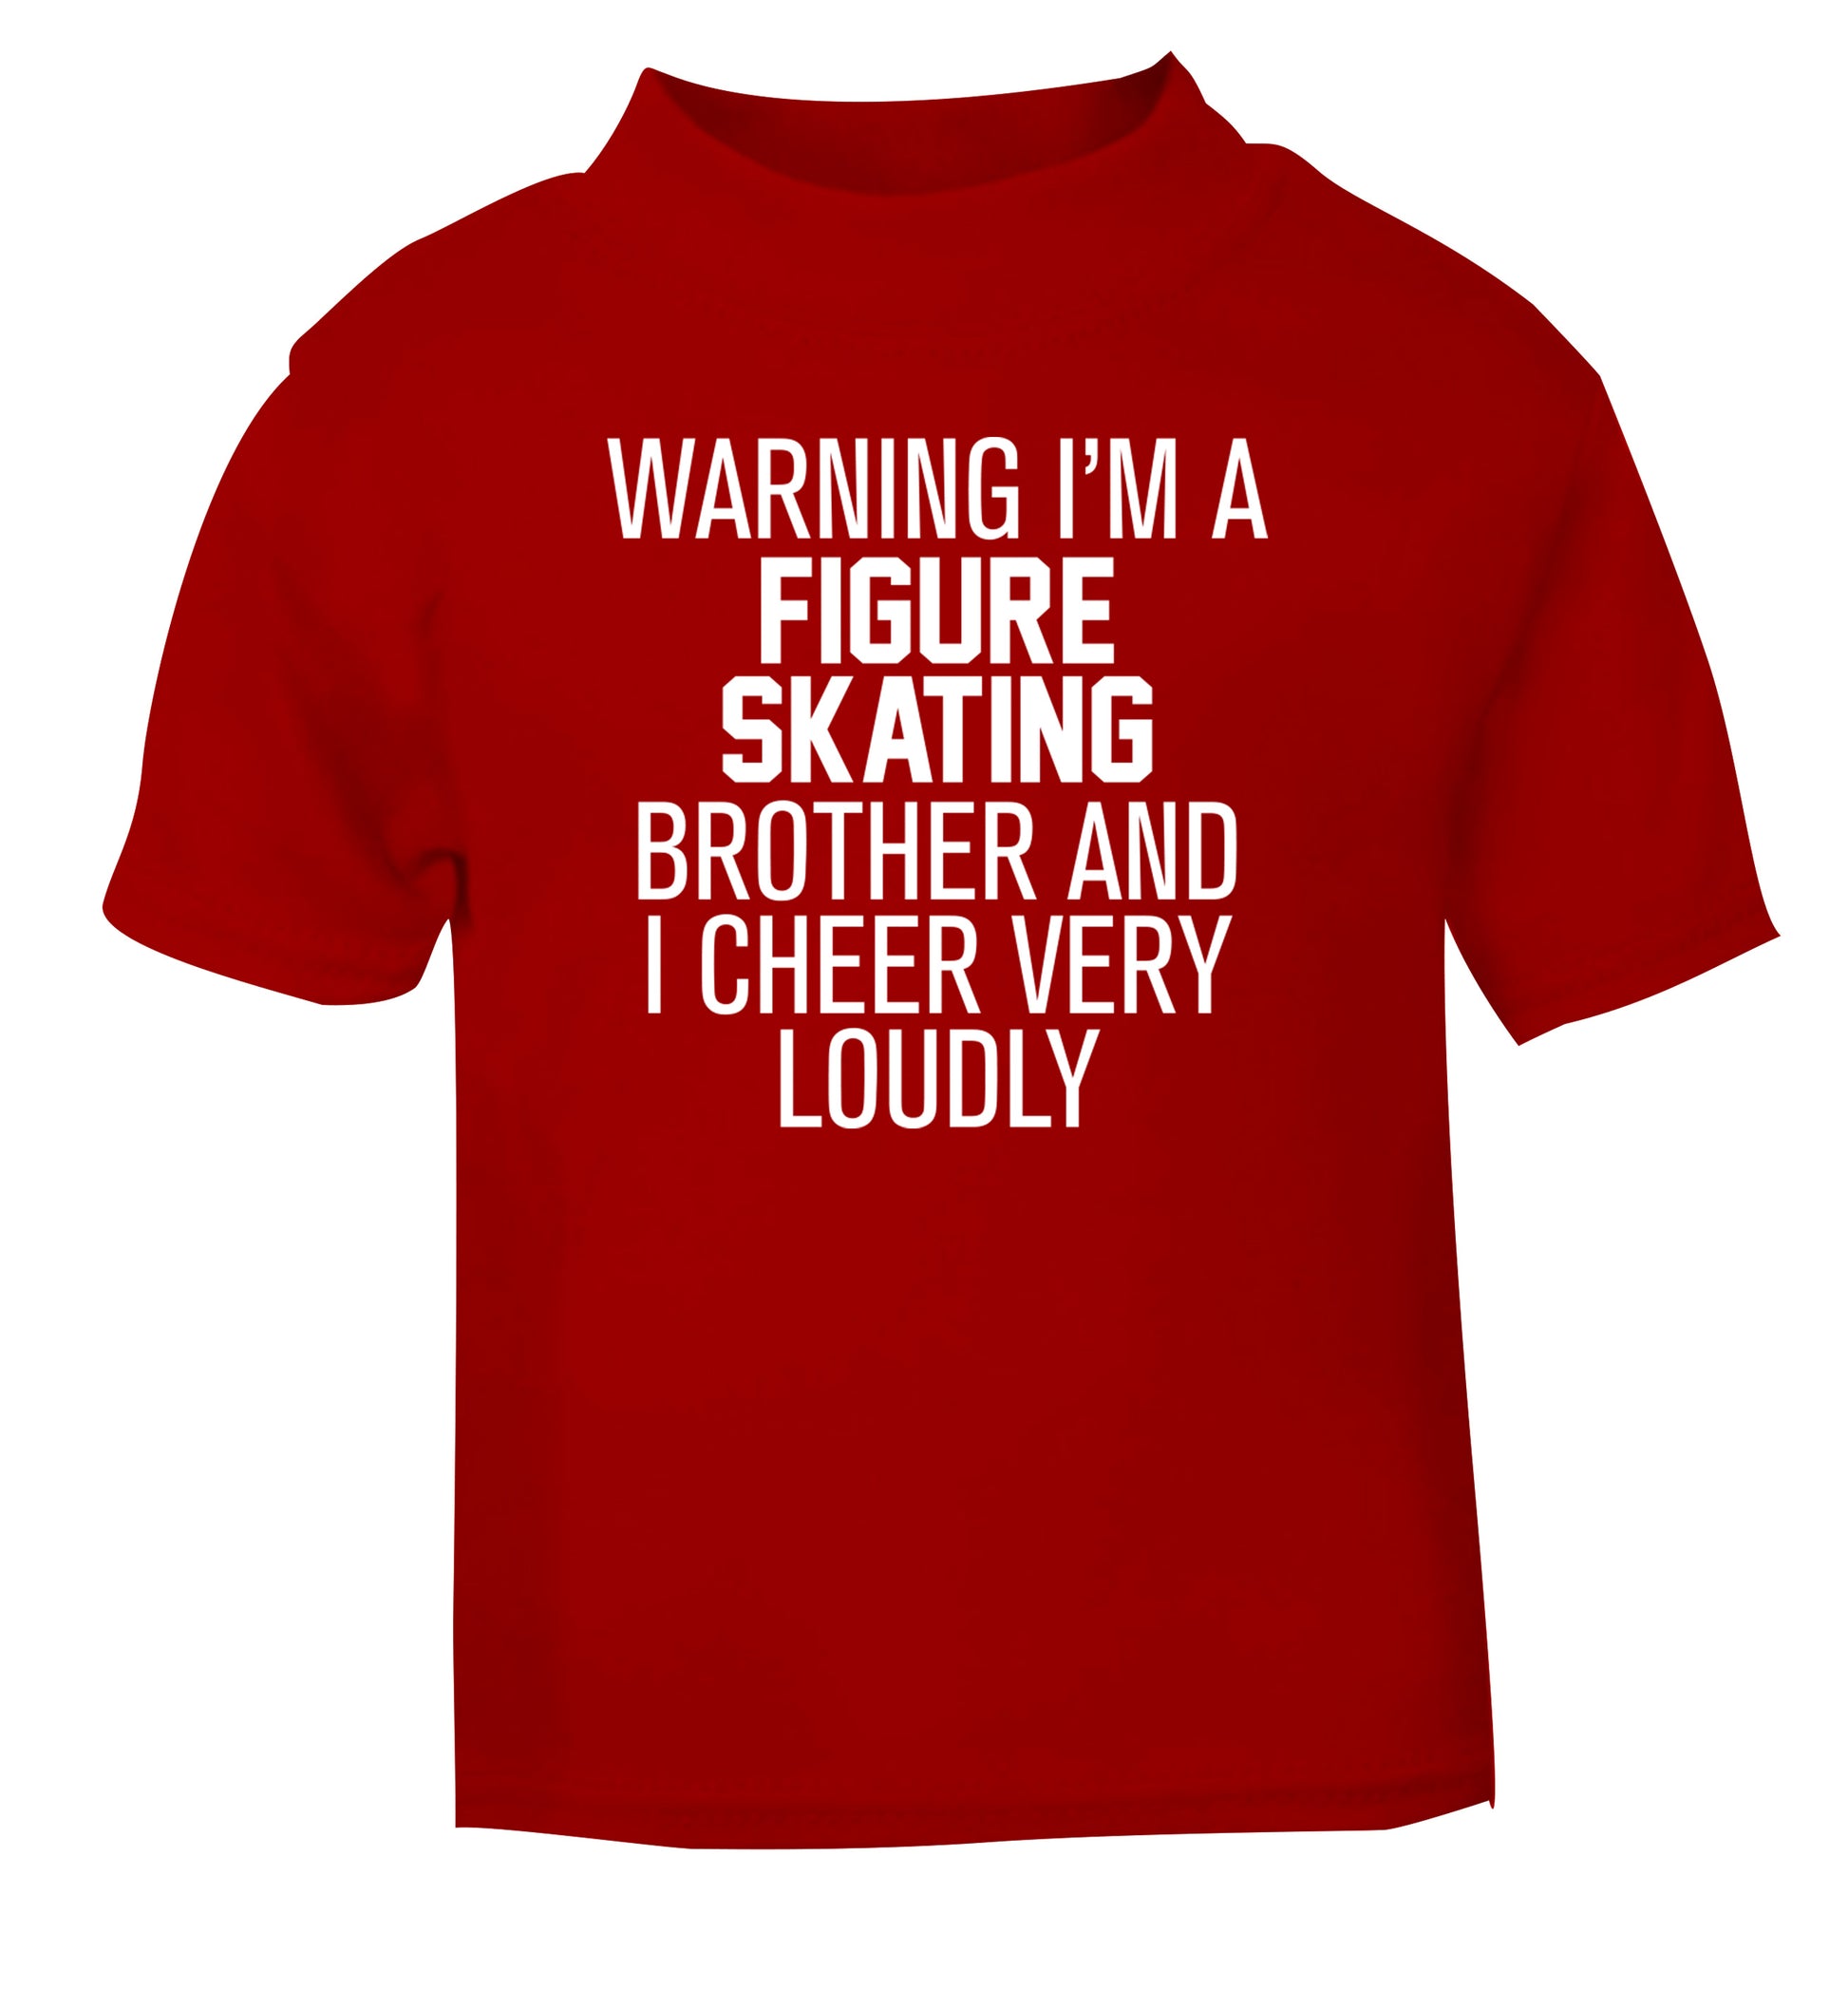 Warning I'm a figure skating brother and I cheer very loudly red Baby Toddler Tshirt 2 Years